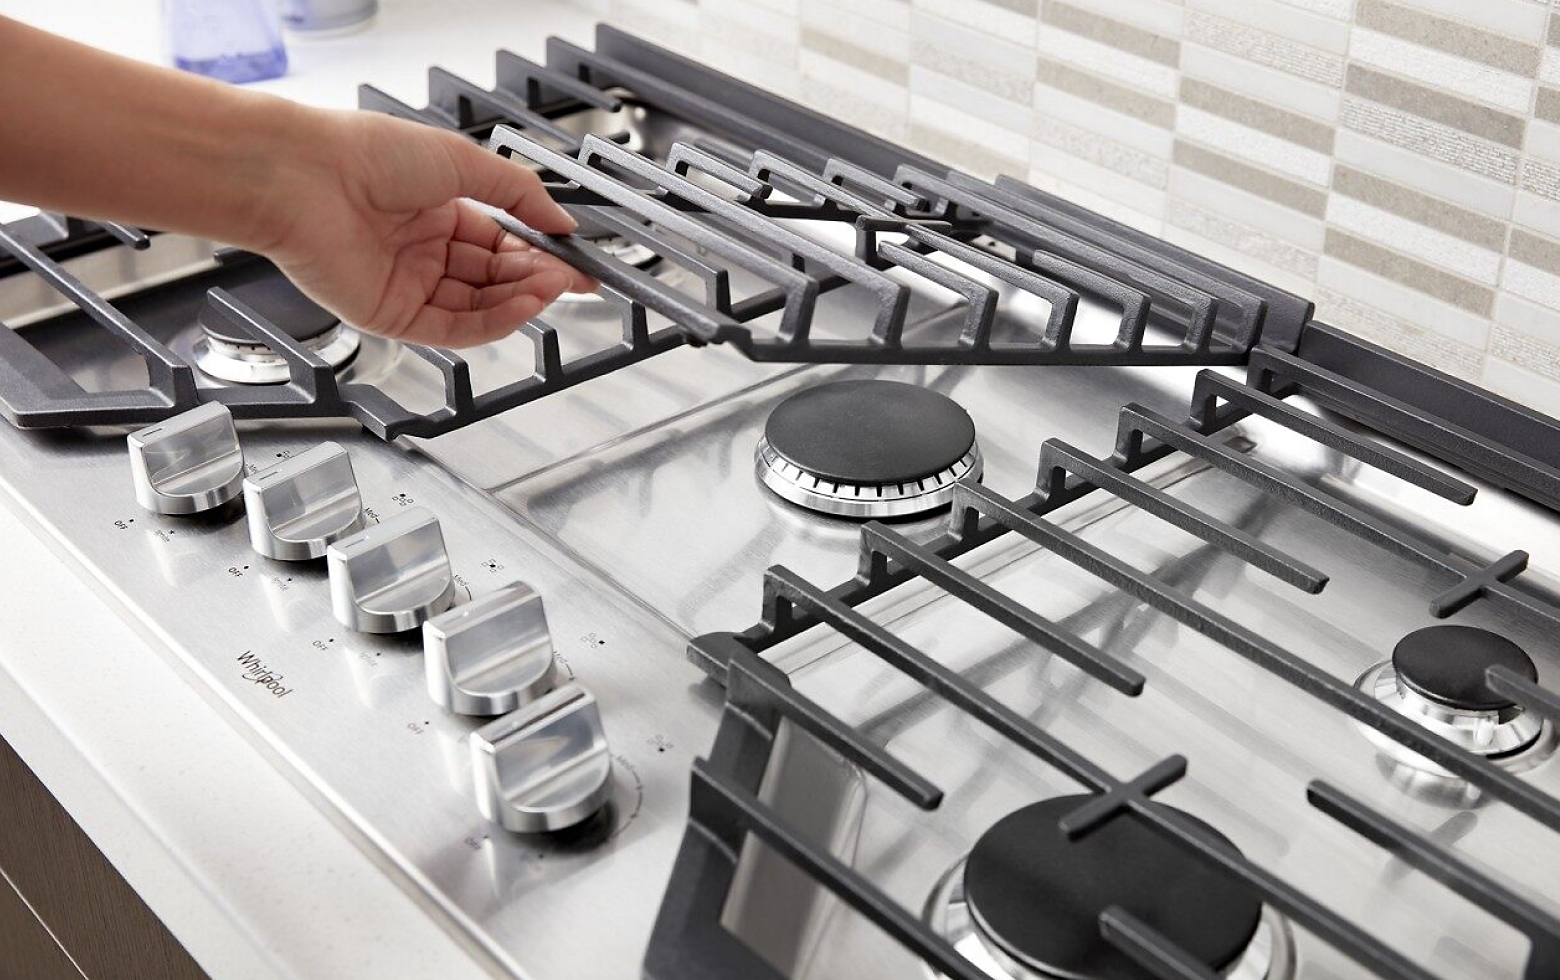 Hand lifting a grate on a gas cooktop